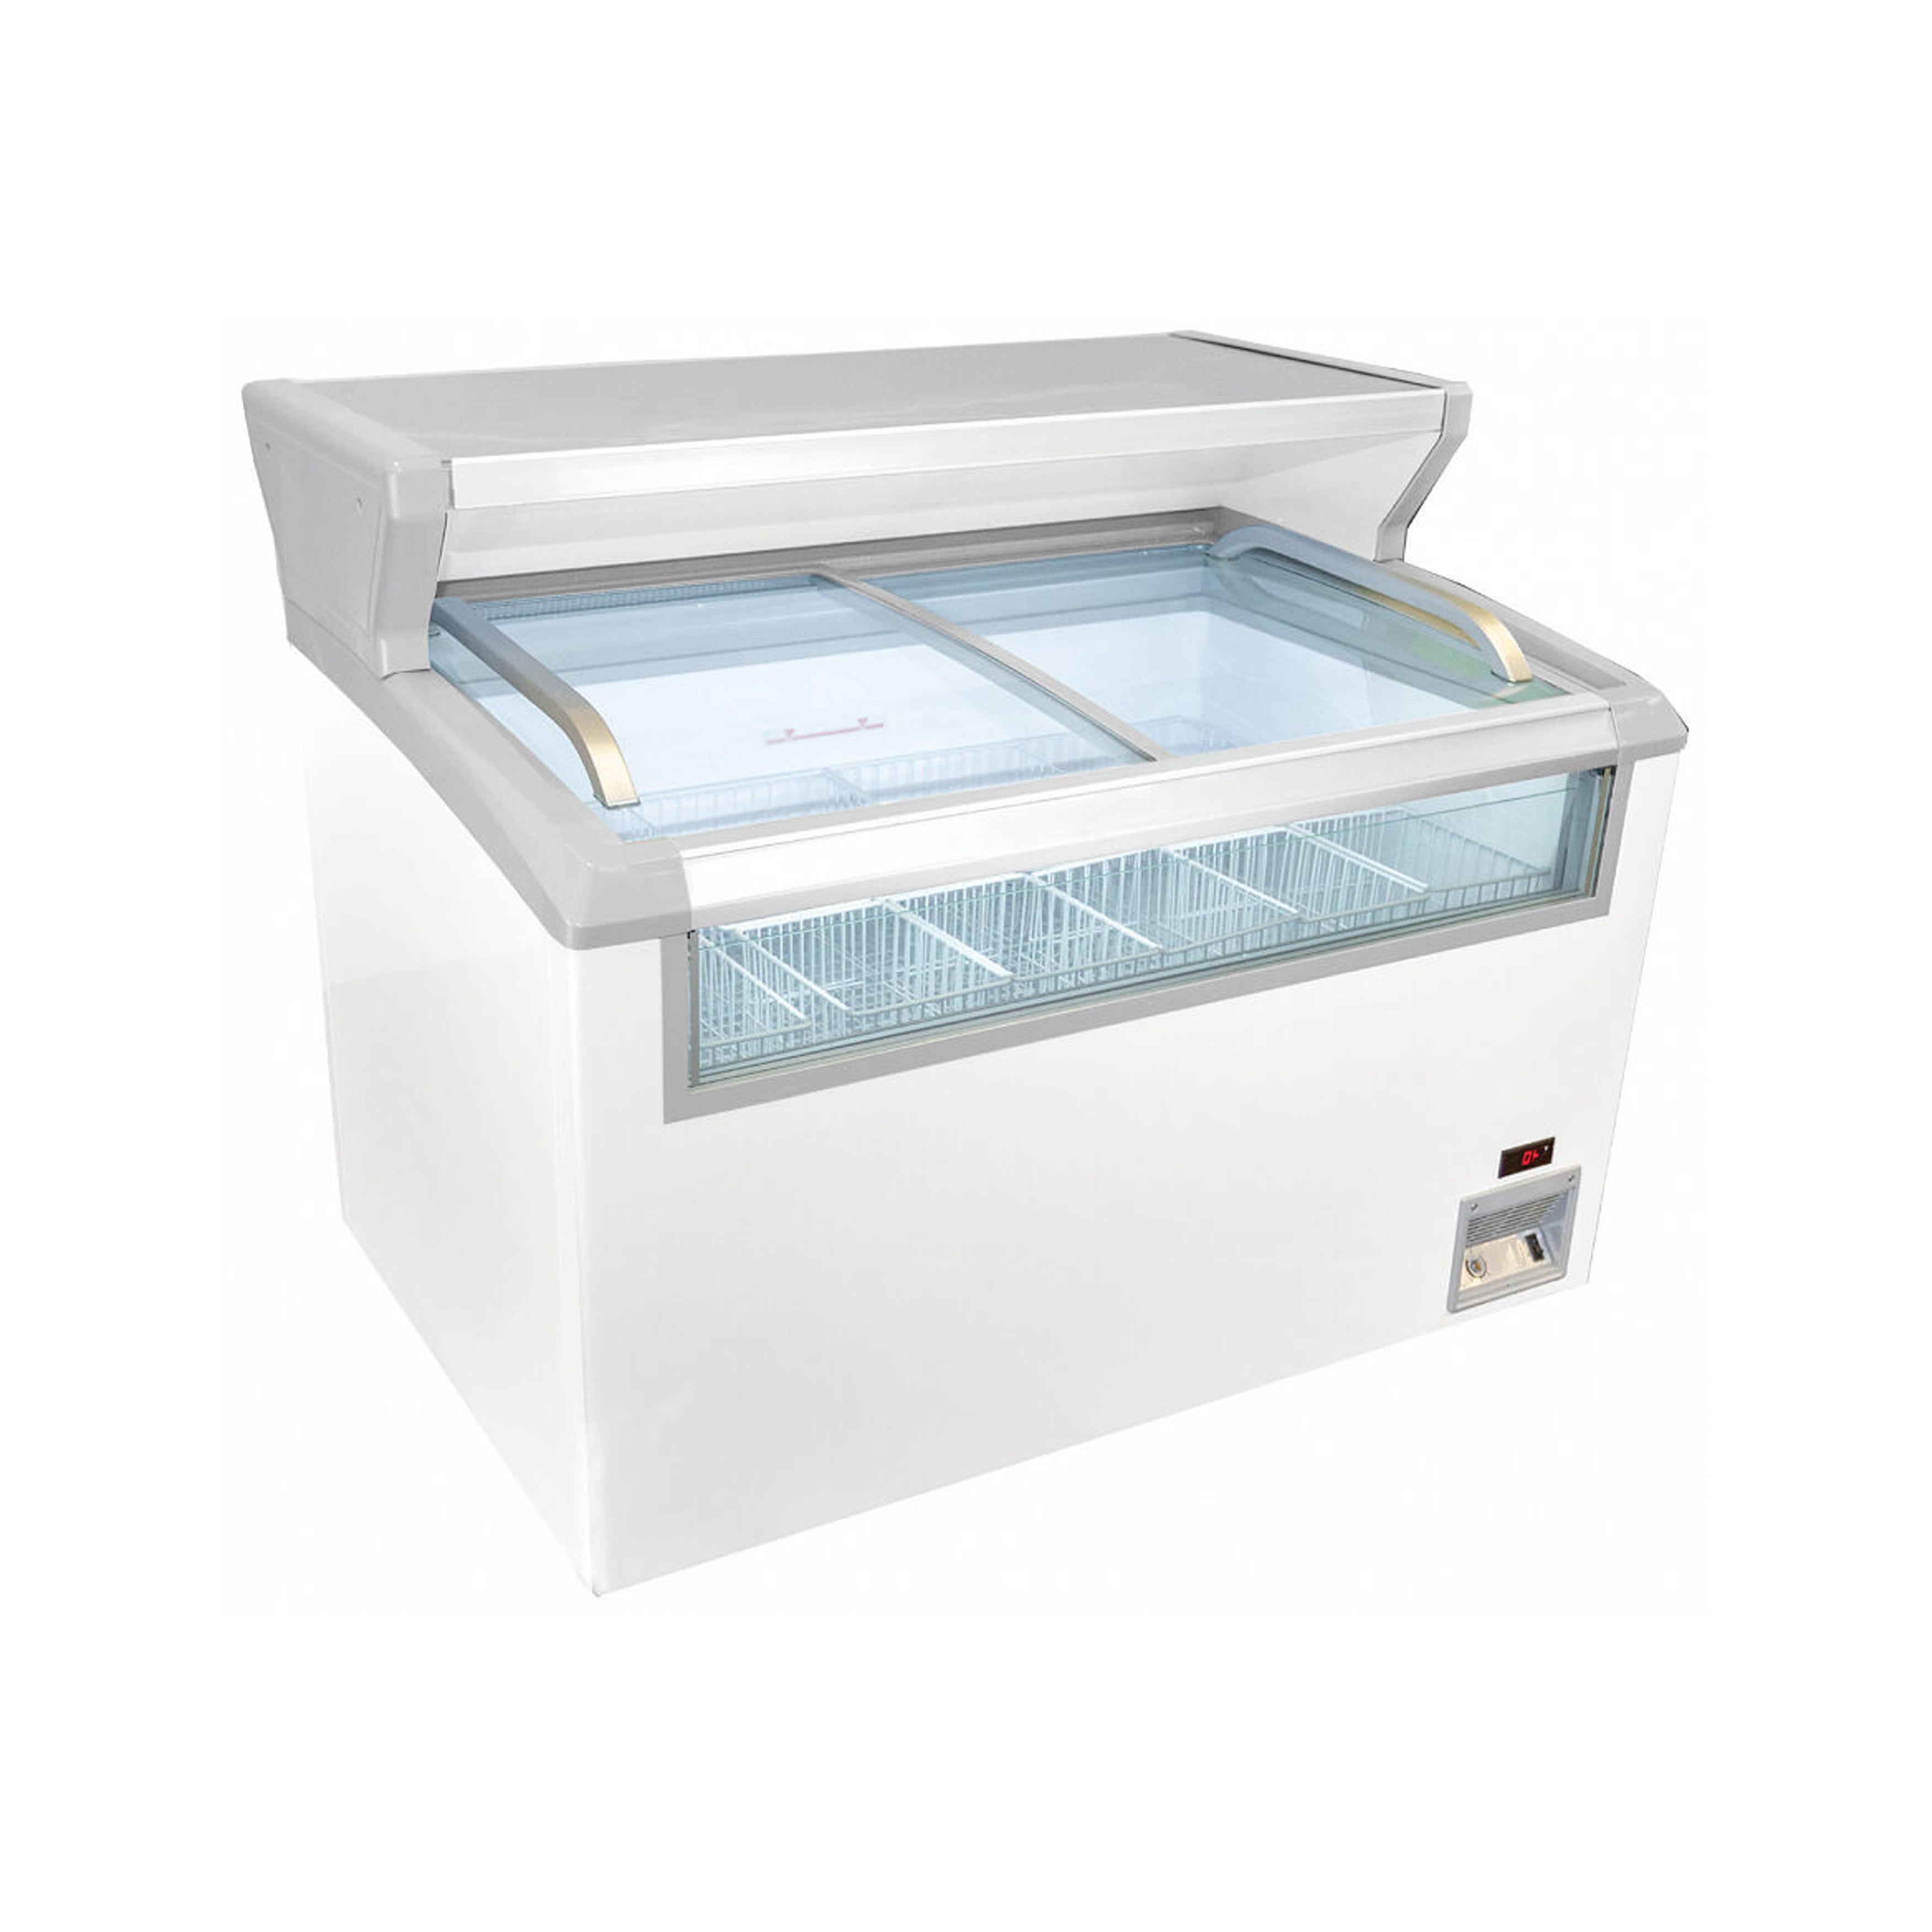 Excellence Industries - MCT-2HC, 25" Commercial Curved Top Display Freezer w/ Merchandising Shelf 5.8 cu. ft.